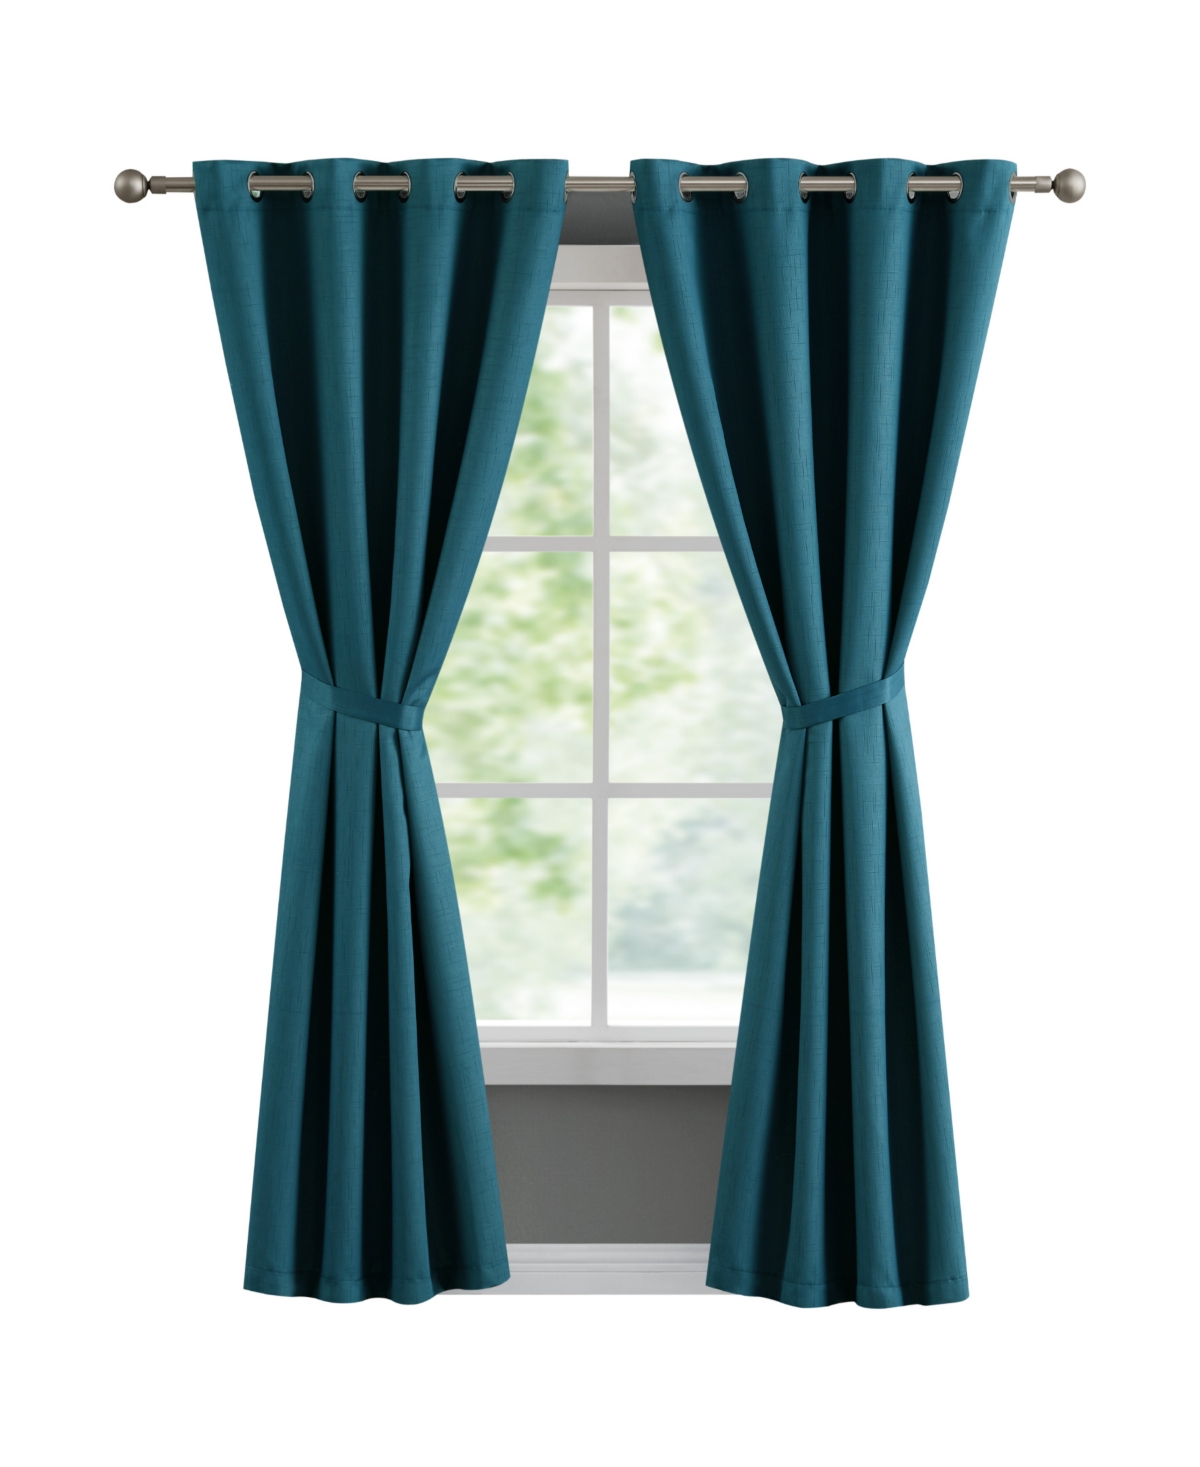 Shop French Connection Ebony Thermal Woven Room Darkening Grommet Window Curtain Panel Pair With Tiebacks, 50" X 96" In Mineral